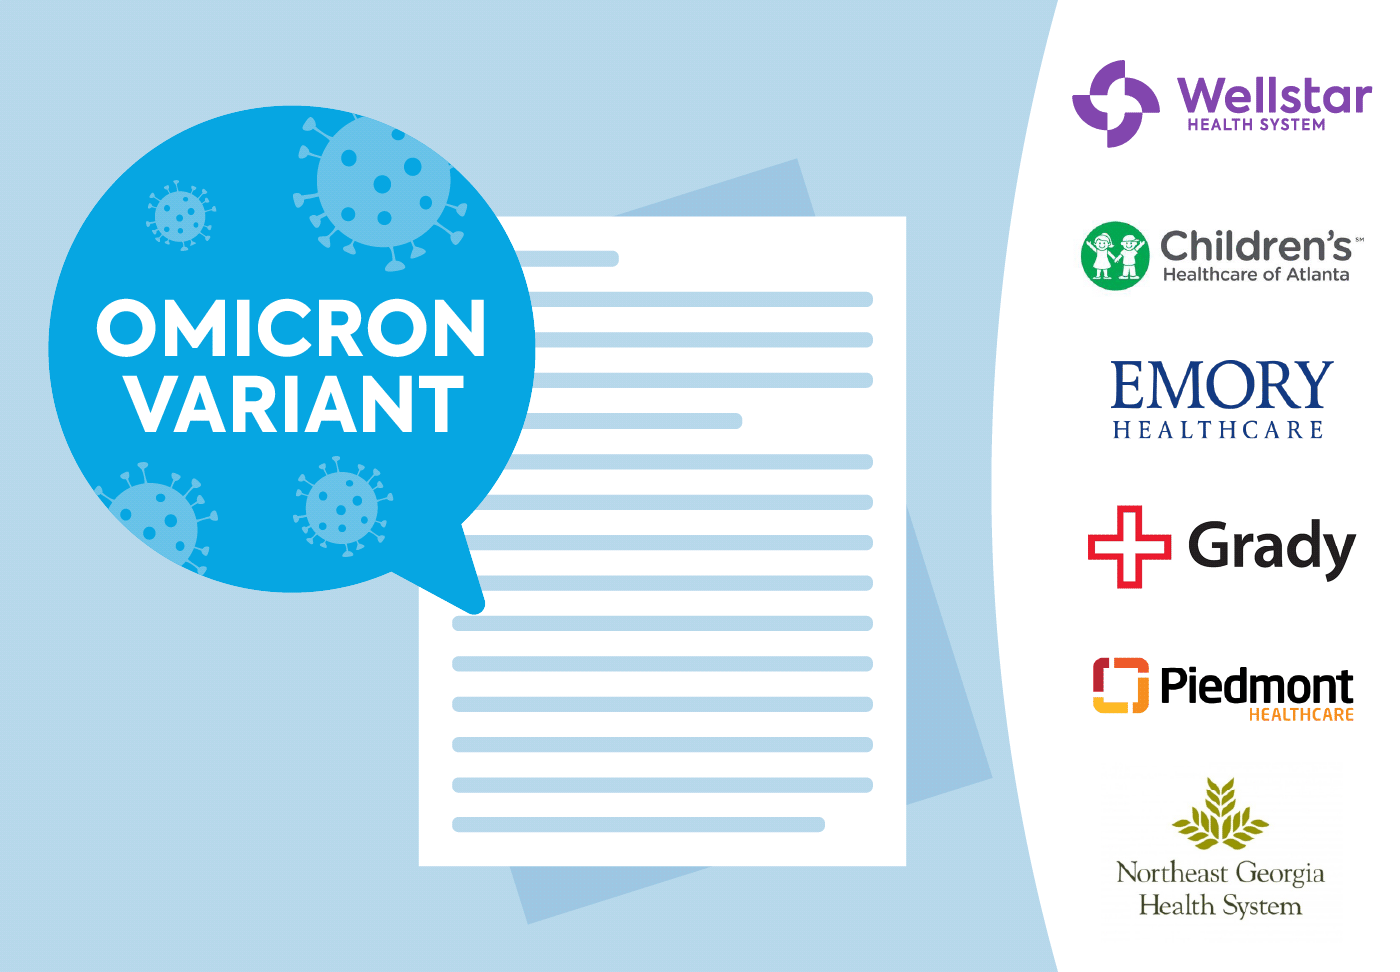 Text bubble with "Omicron variant," health system logos